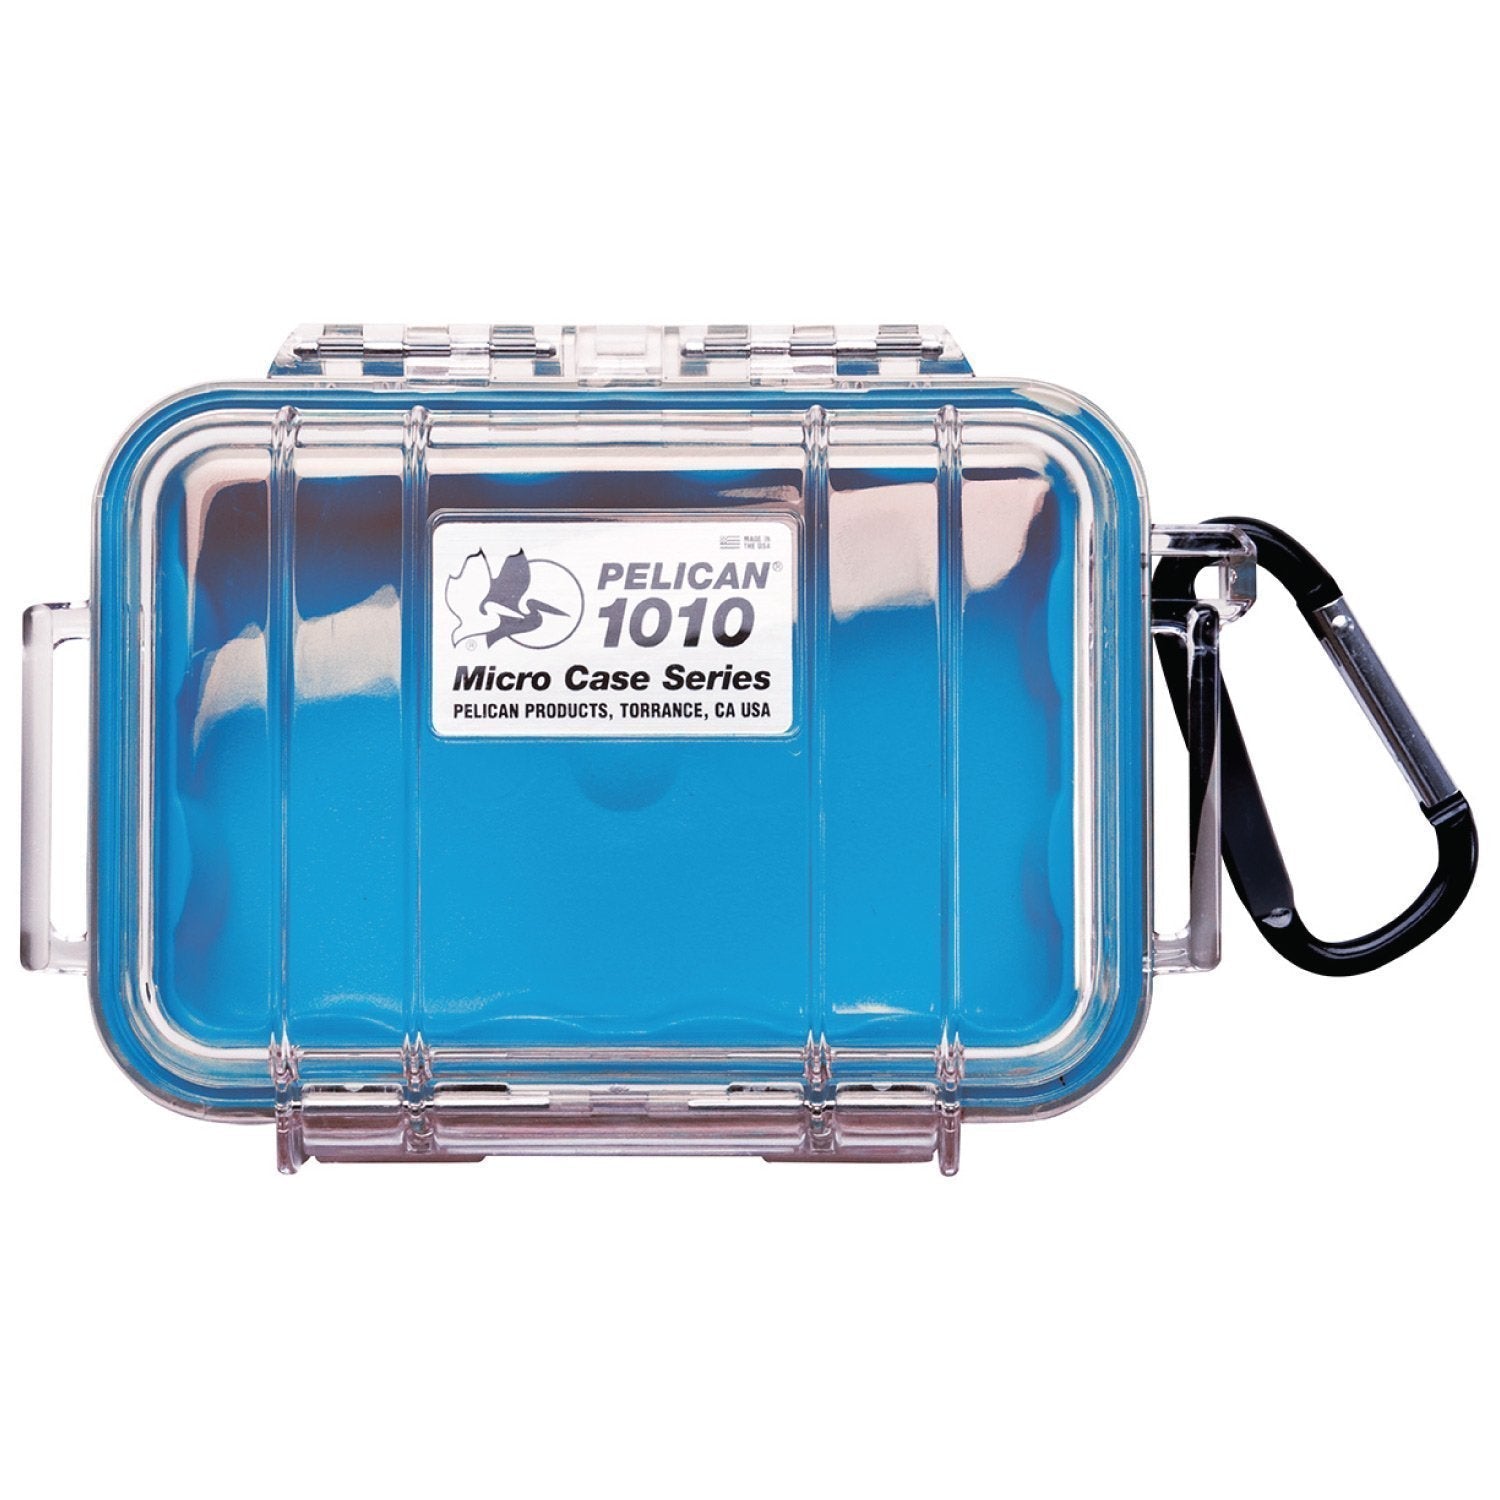 Pelican 1010 Micro Case Cases Pelican Products Clear Shell with Blue Liner Tactical Gear Supplier Tactical Distributors Australia